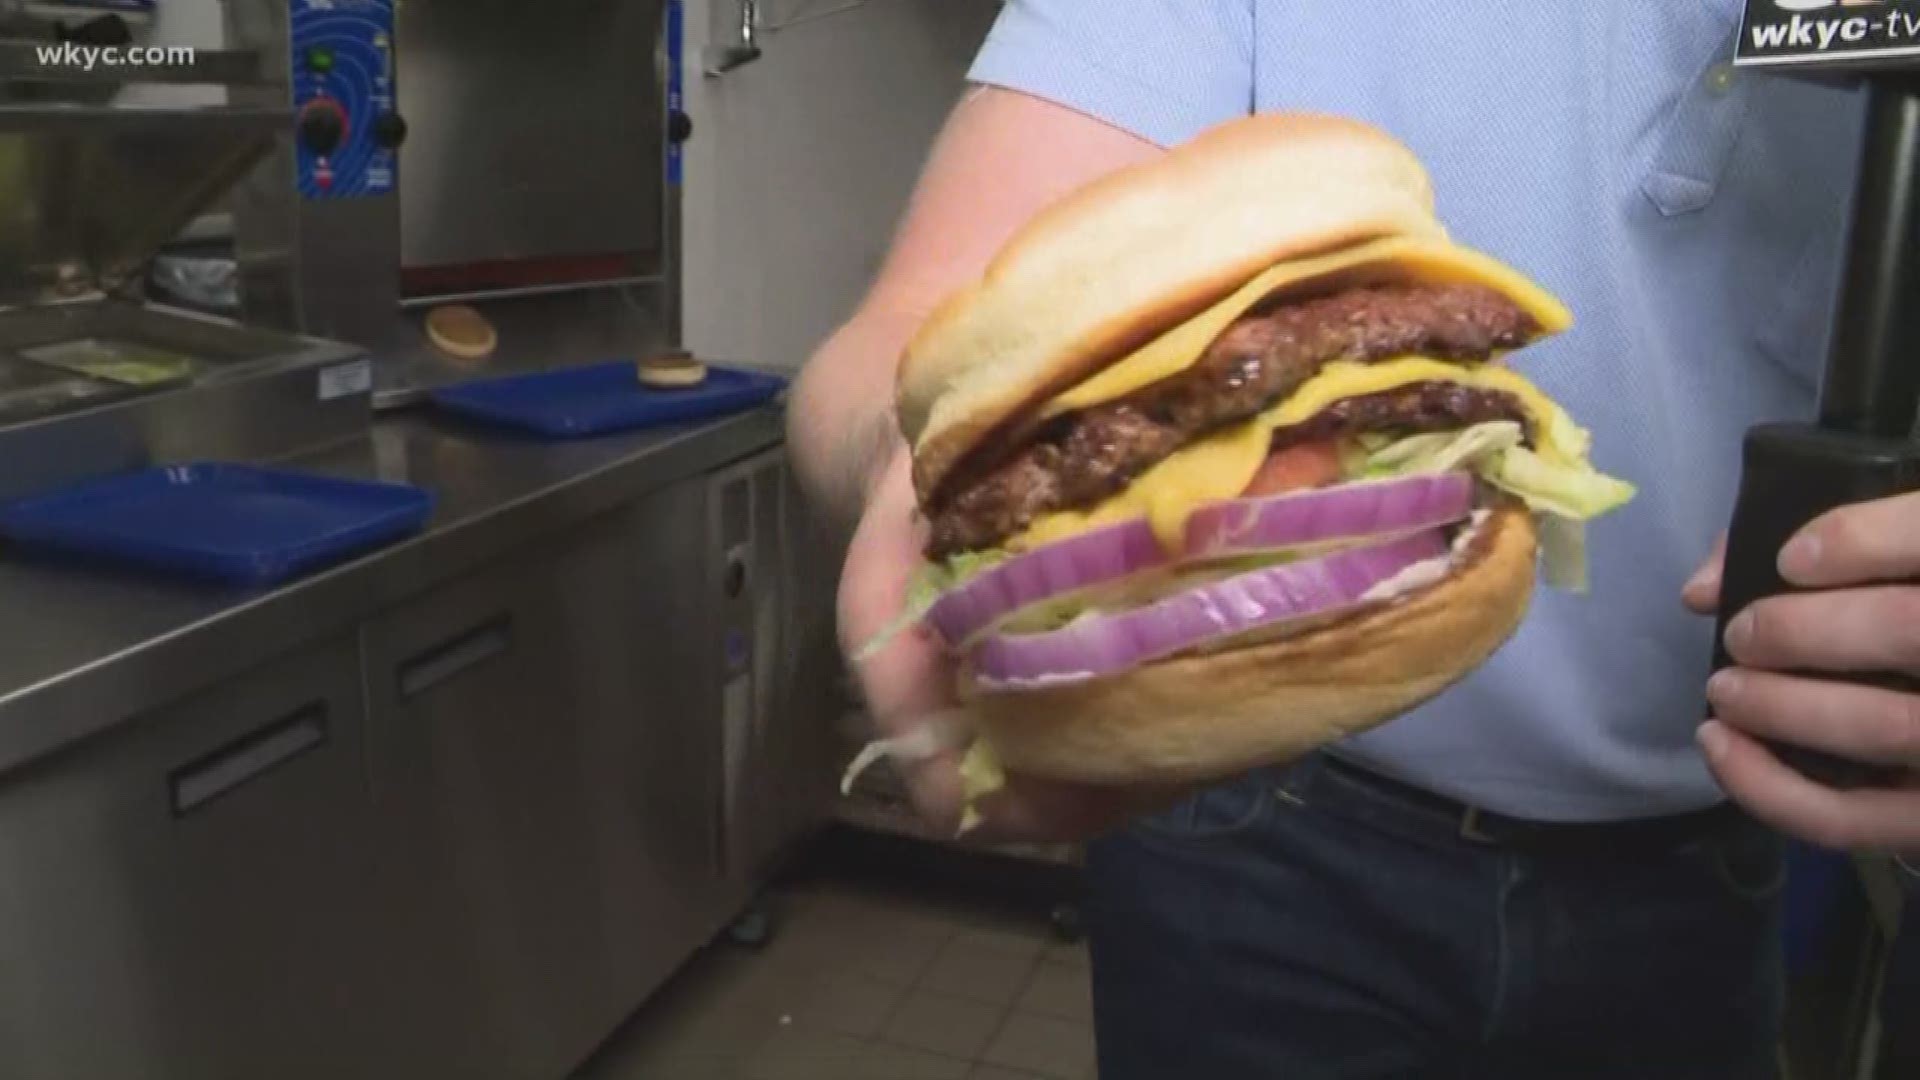 July 3, 2018: Here's what goes into creating a butter burger at Culver's.